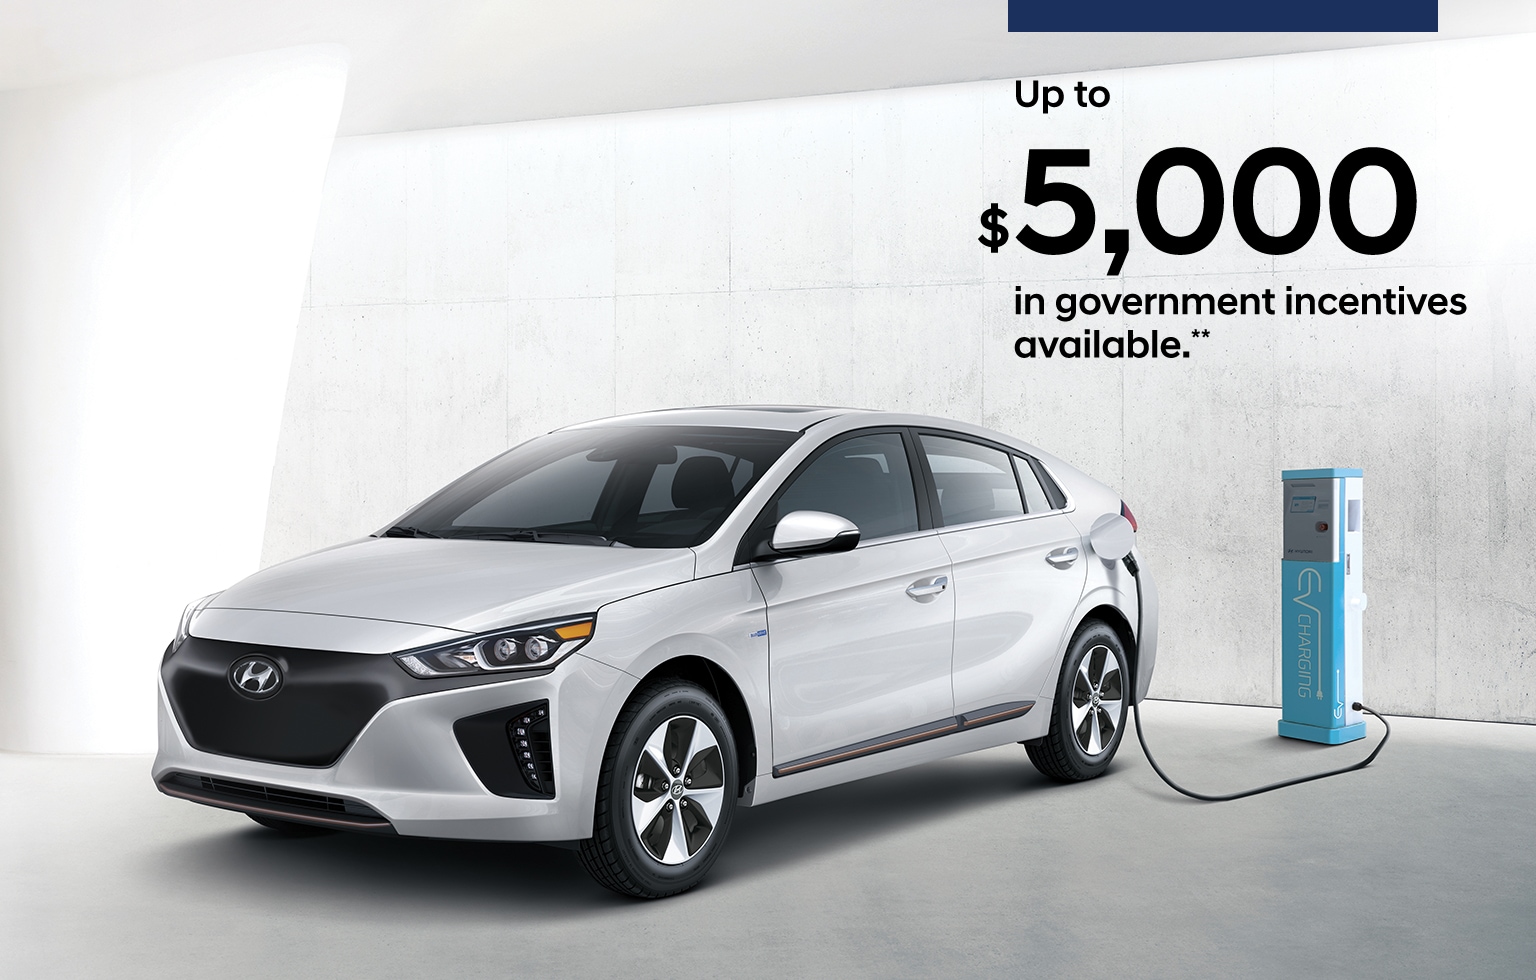 hyundai-s-ioniq-5-ev-is-coming-to-canada-this-fall-thecanadiantechie